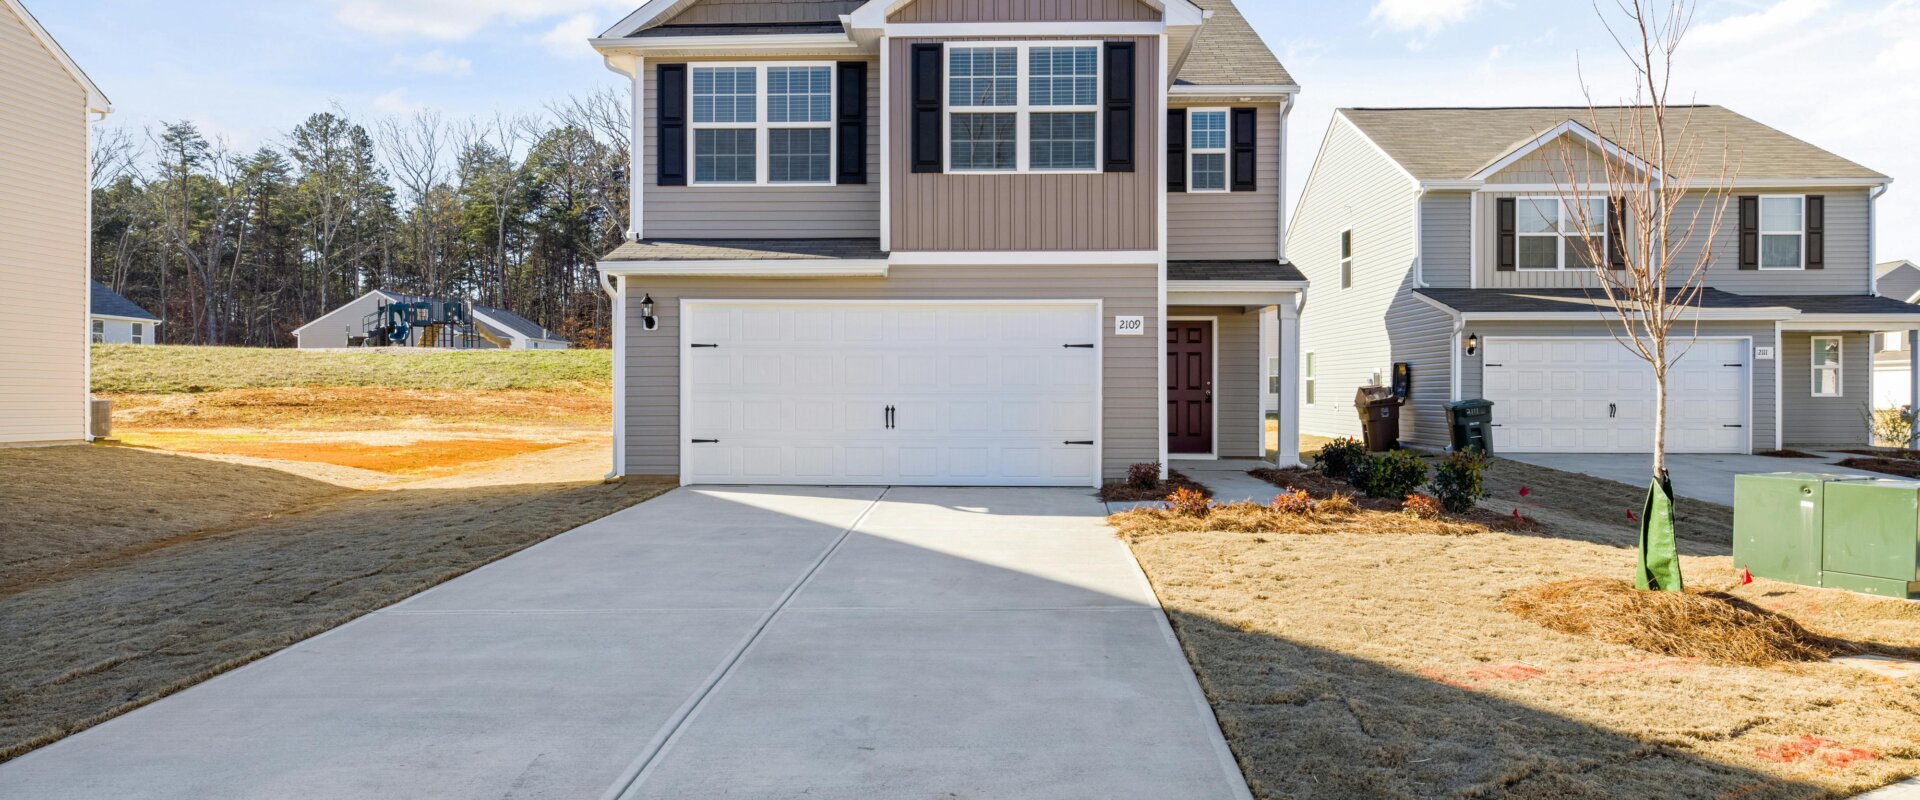 Local two story home in suburb of Raleigh, NC is for sale with no MLS listing or agent.